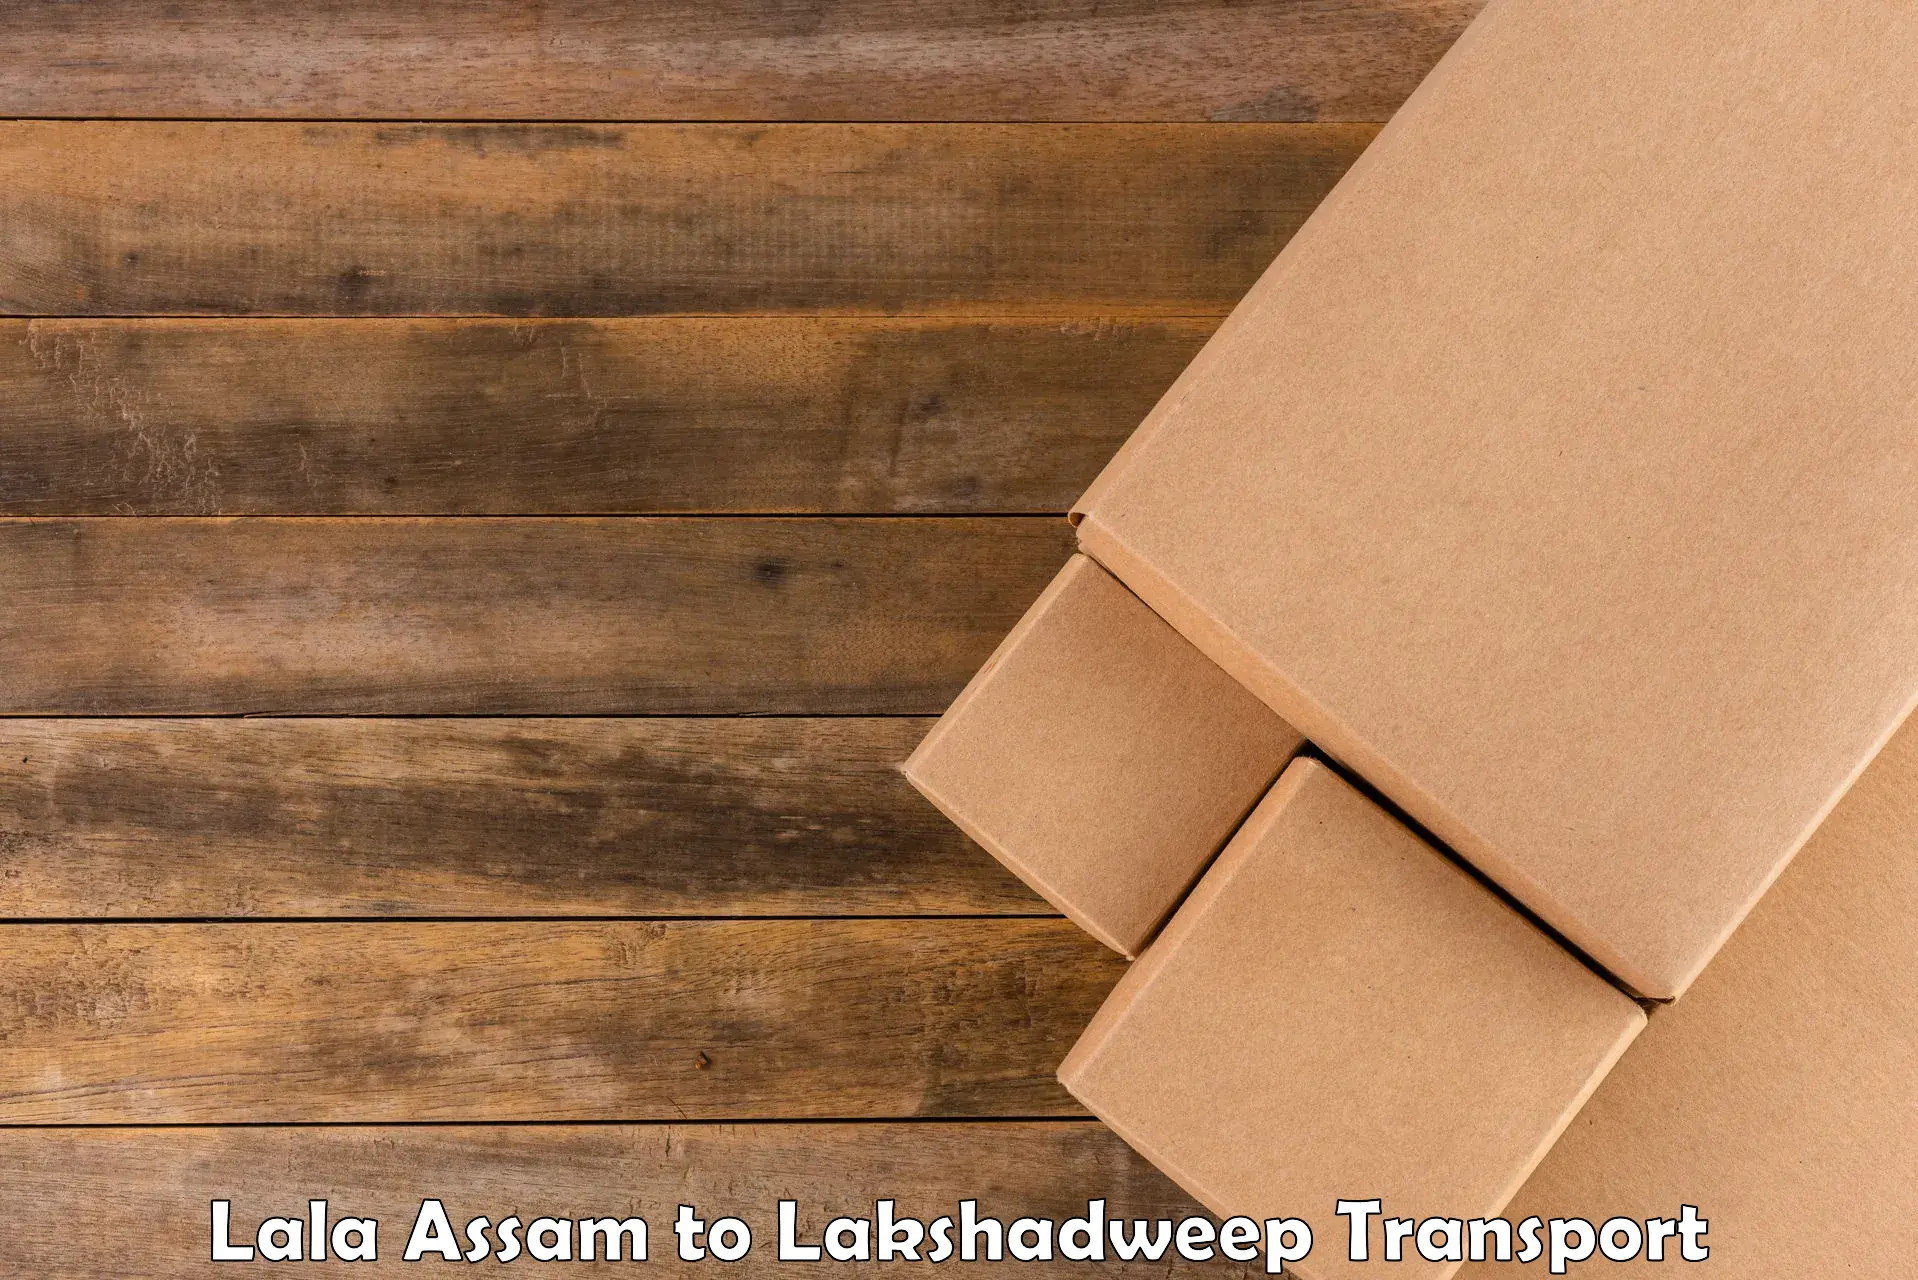 Transportation solution services Lala Assam to Lakshadweep